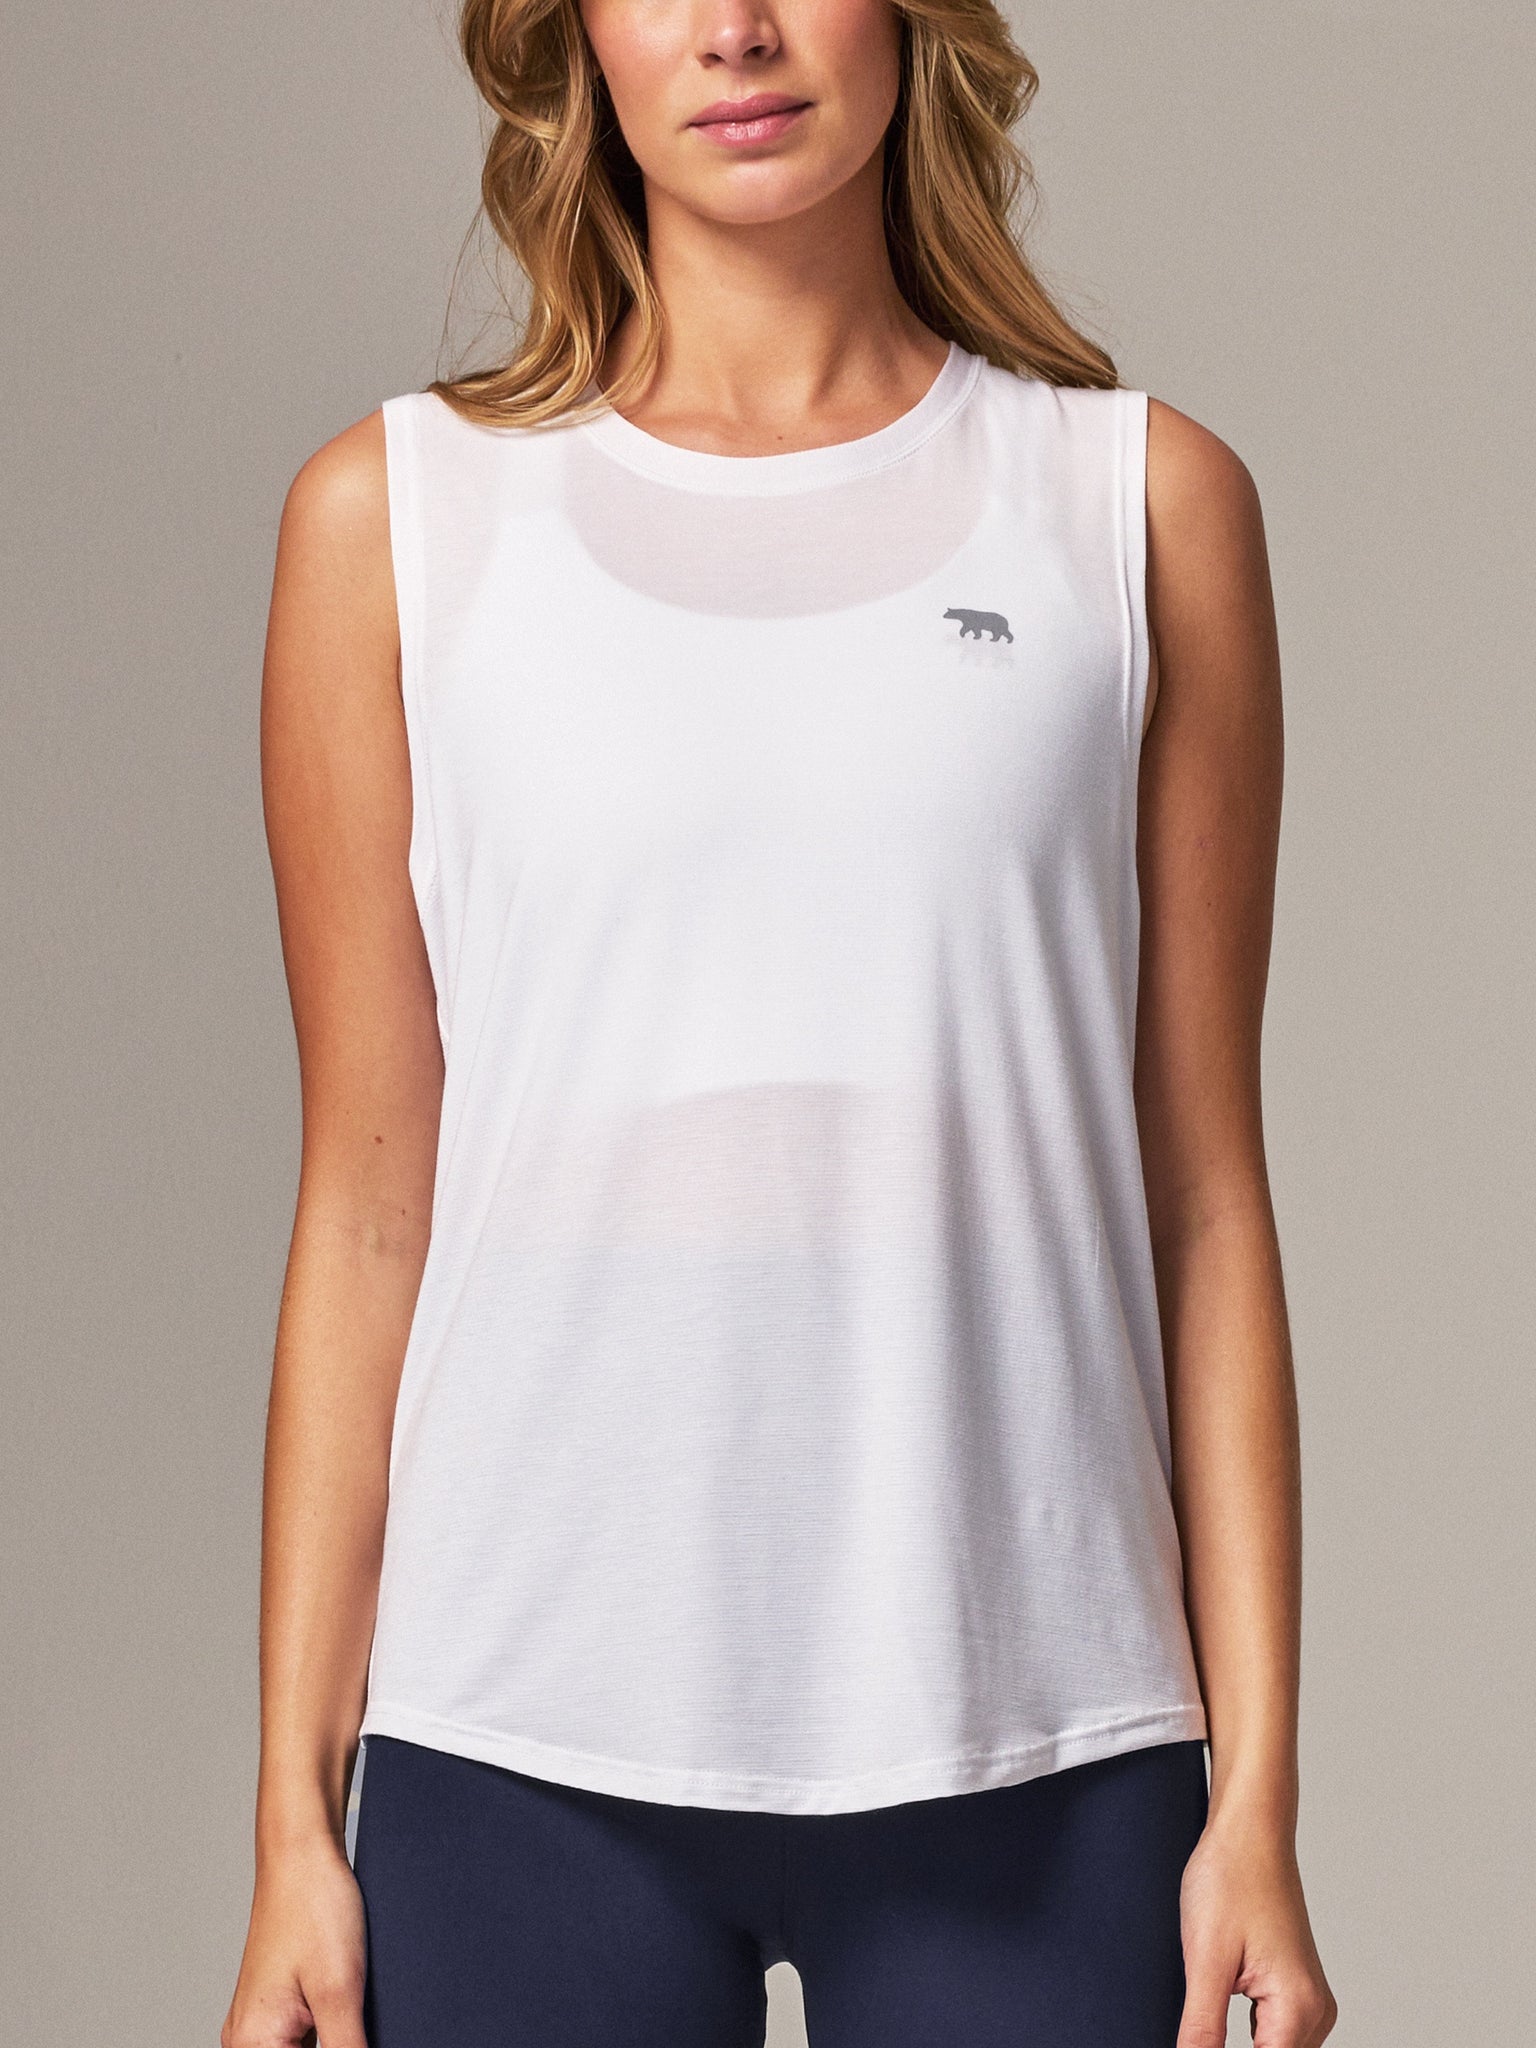 Dial Up Workout Tank - White - Tops